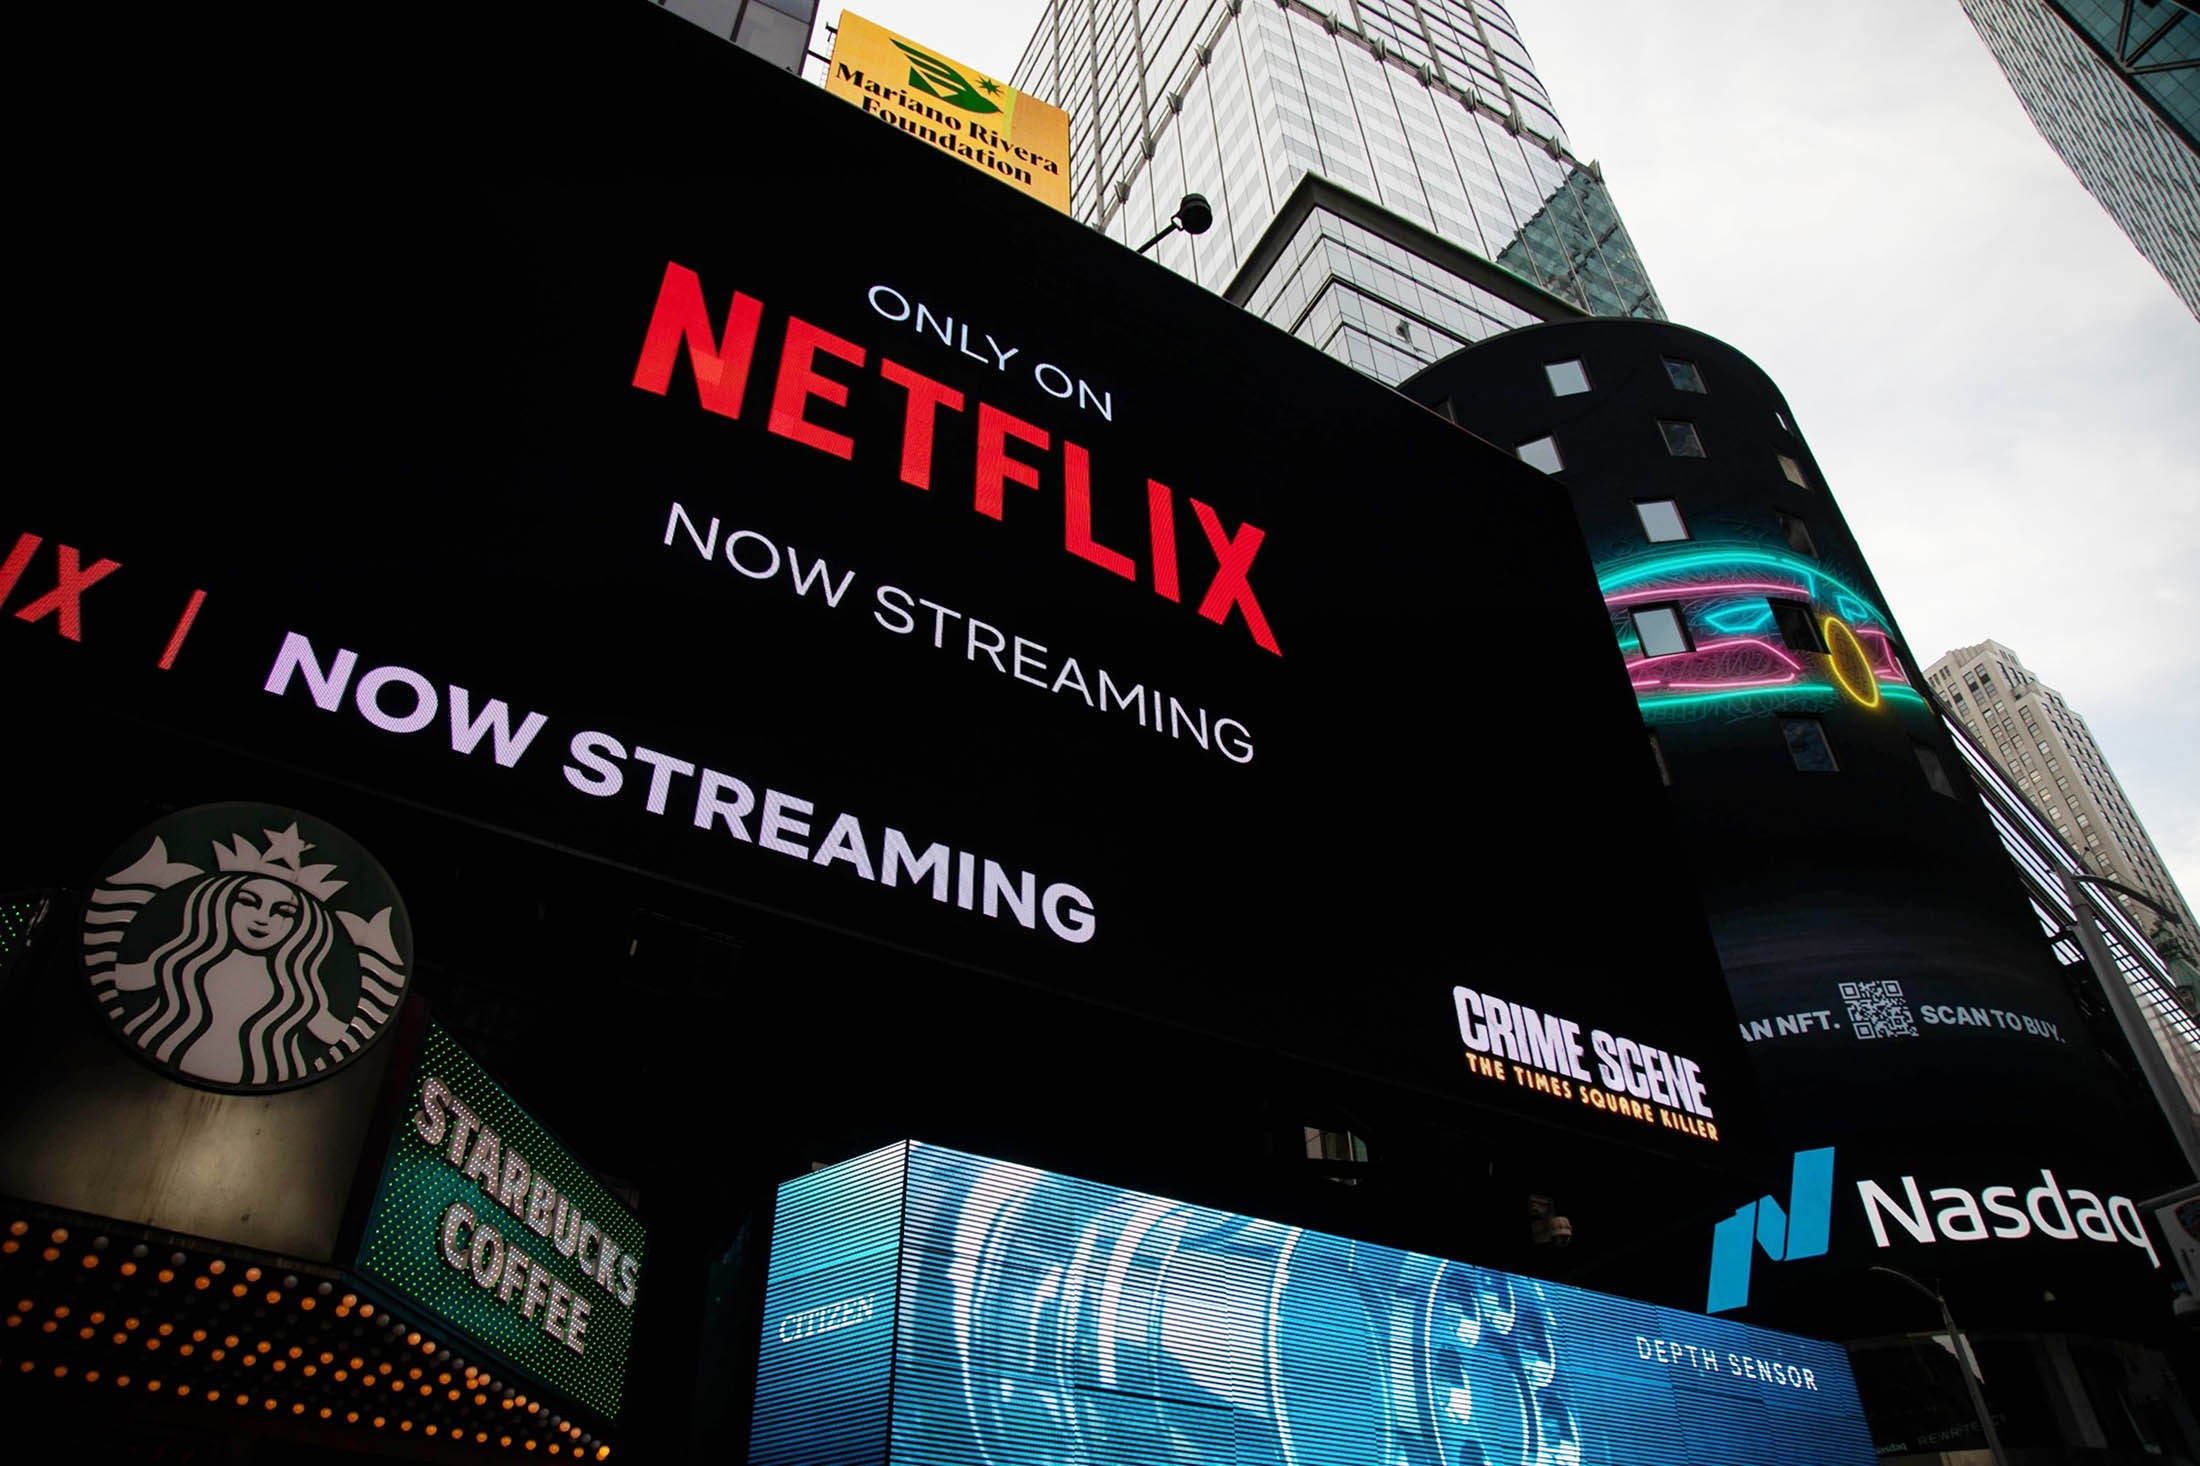 A Netflix advertisement in Times Square, New York.